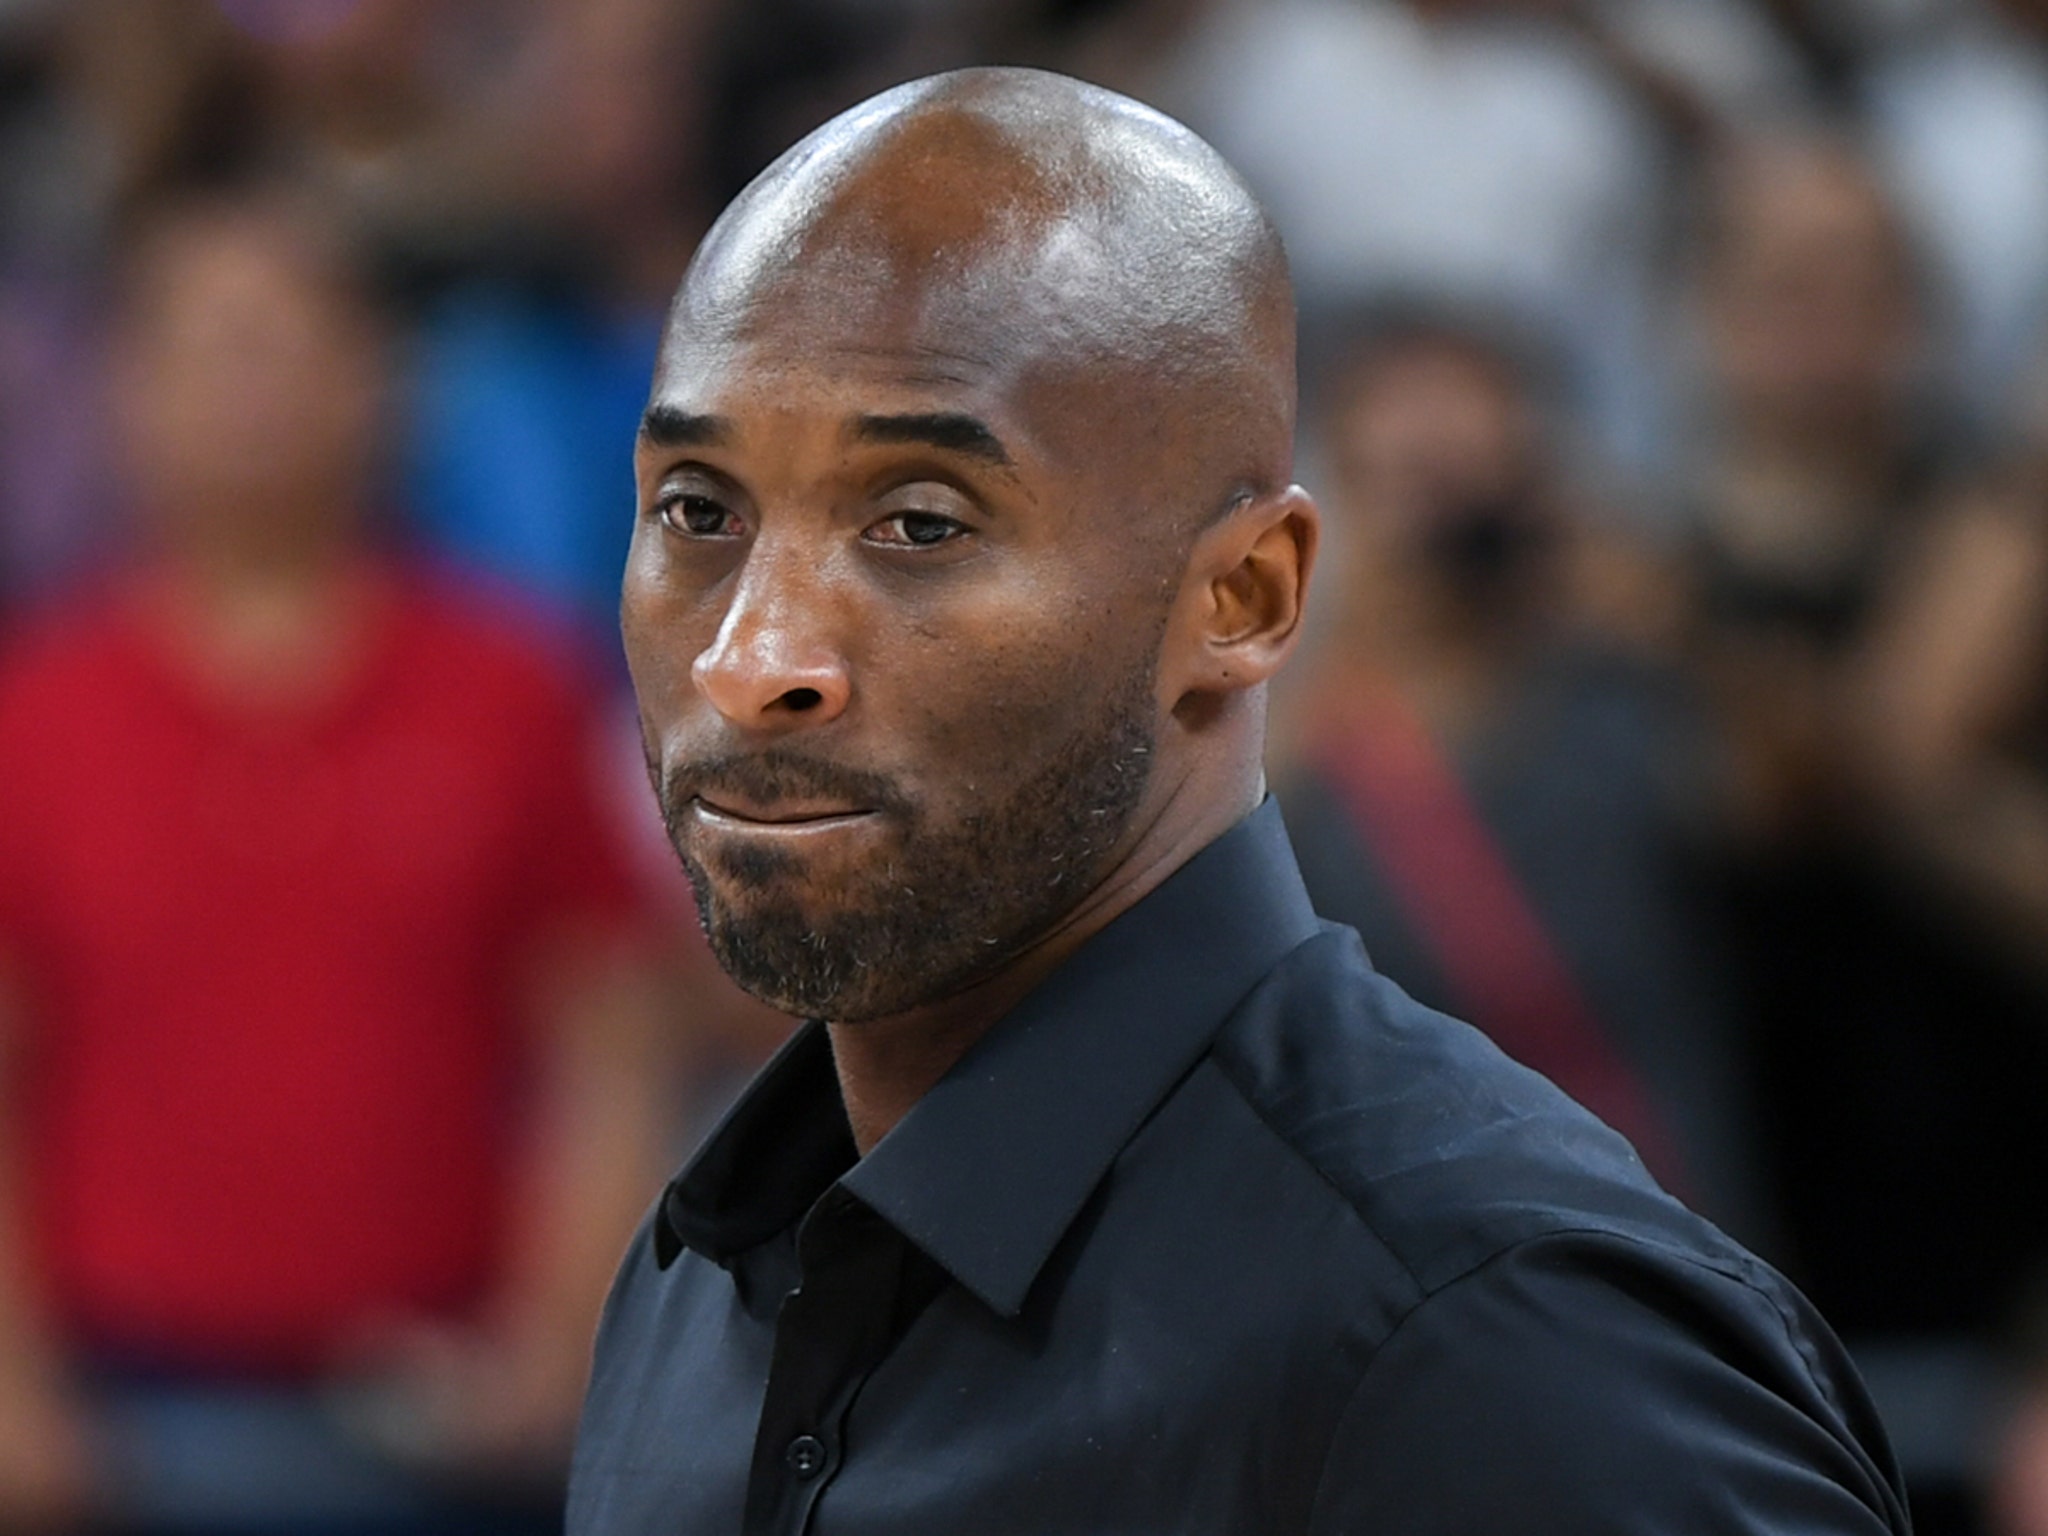 Kobe Bryant Memorial Could Be Held At Coliseum Instead Of Staples Center